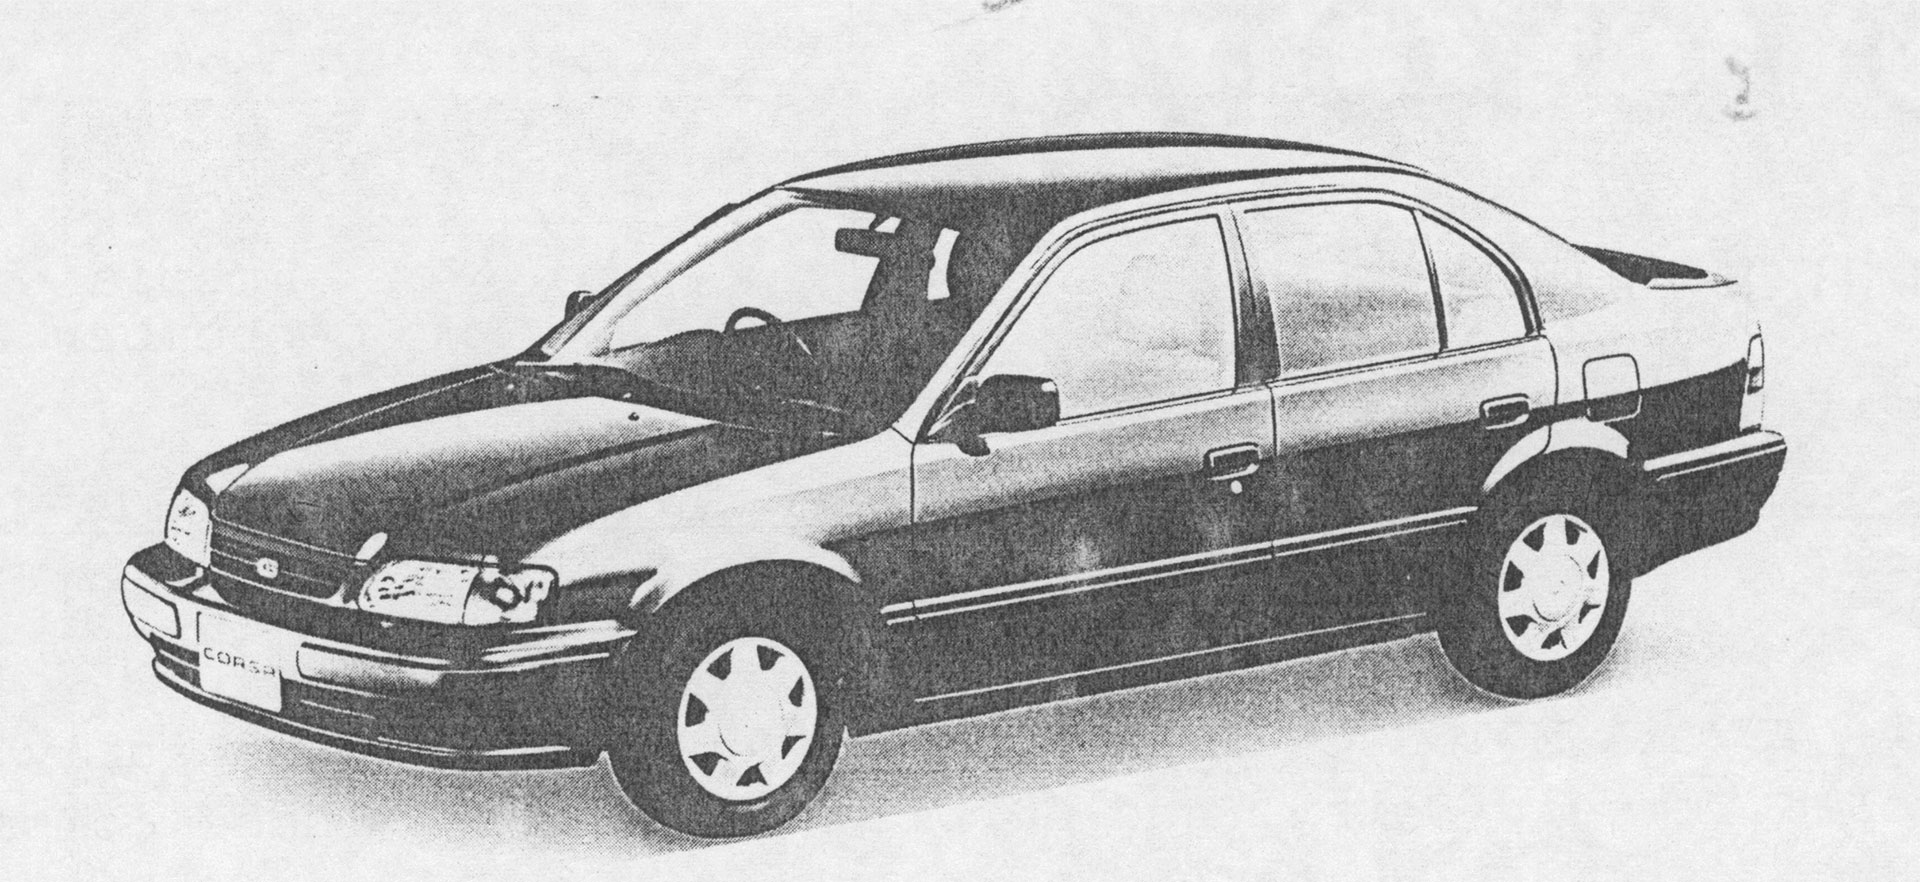 Corsa 1300 AX (with options)